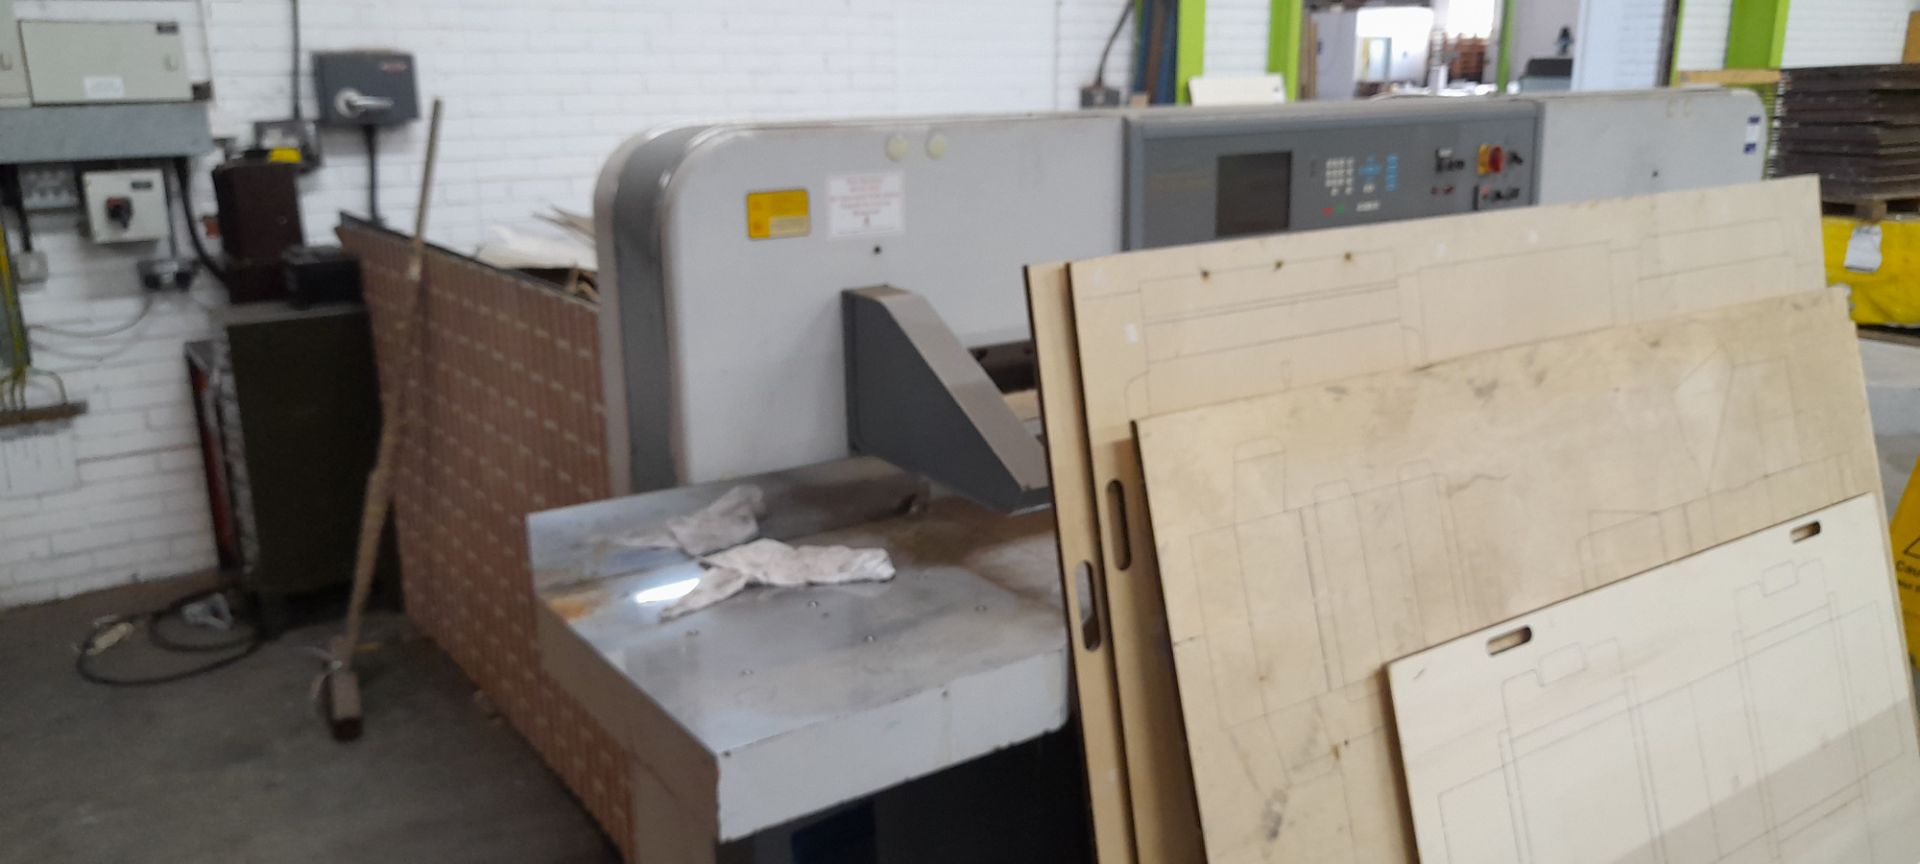 Sino Foreign QZK 2200 Guillotine. (spares or repairs only, not in working order) - Image 2 of 5